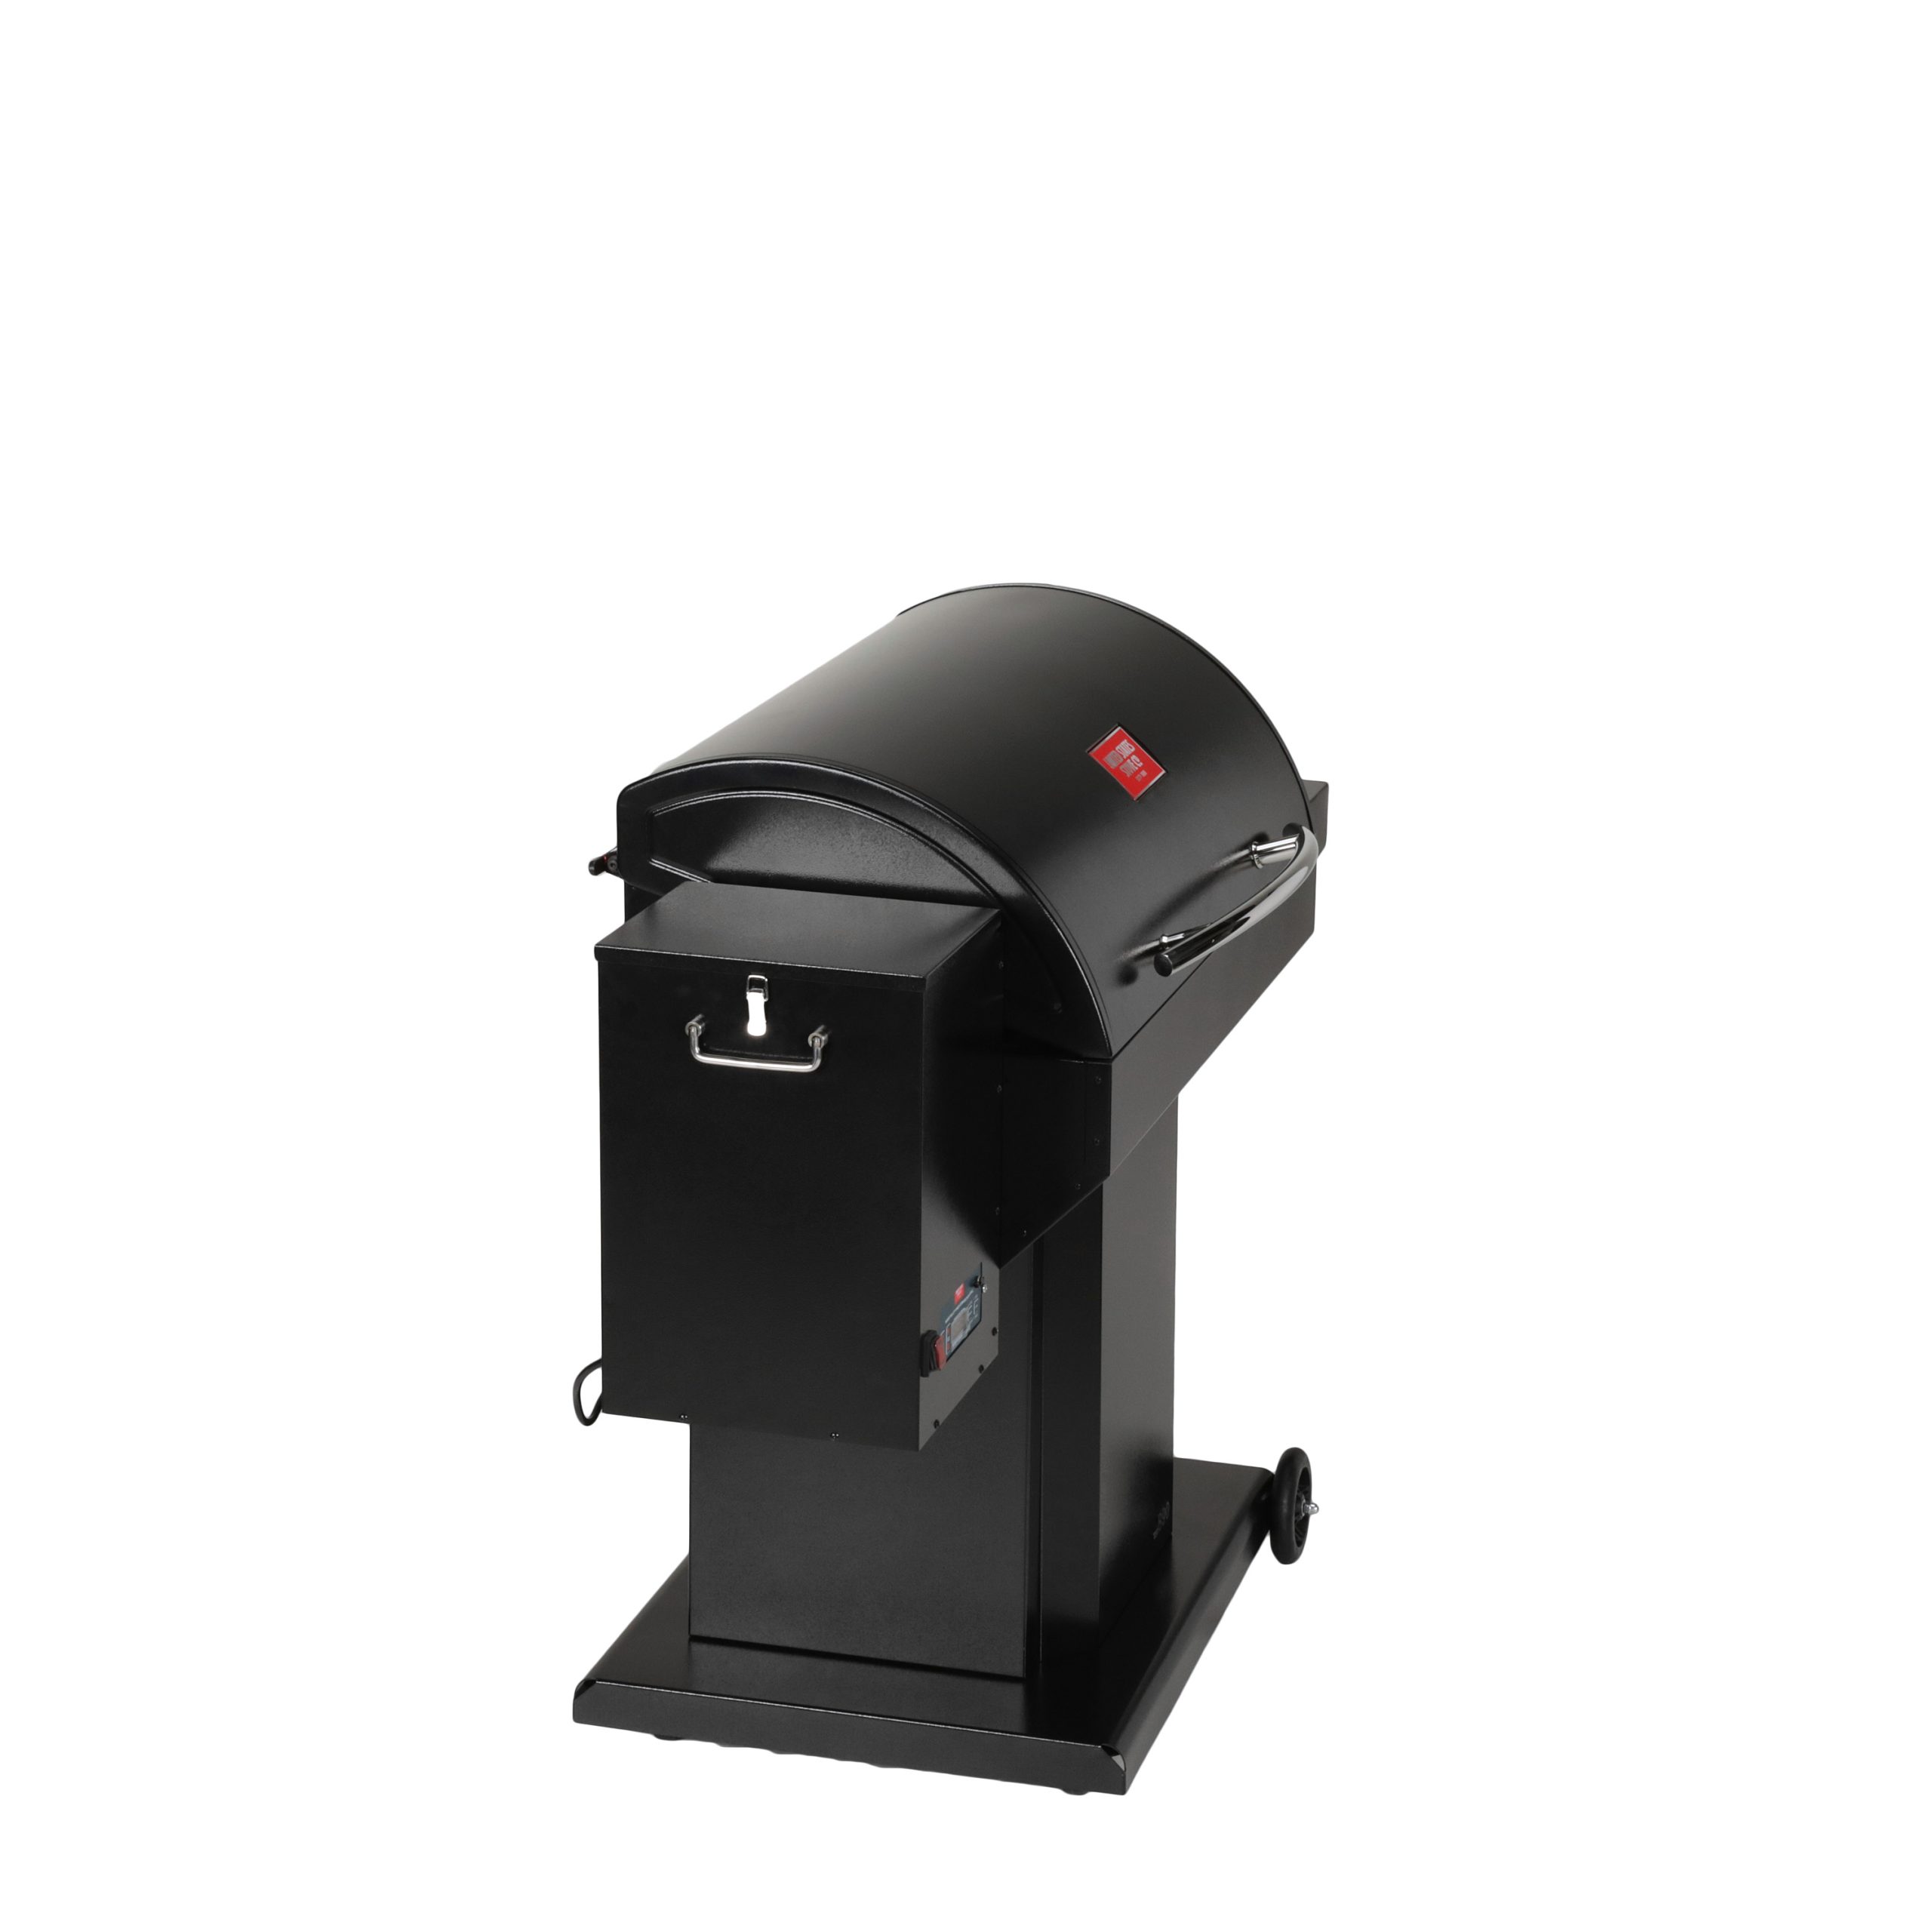 The Irondale USG890 Wood Pellet Grill